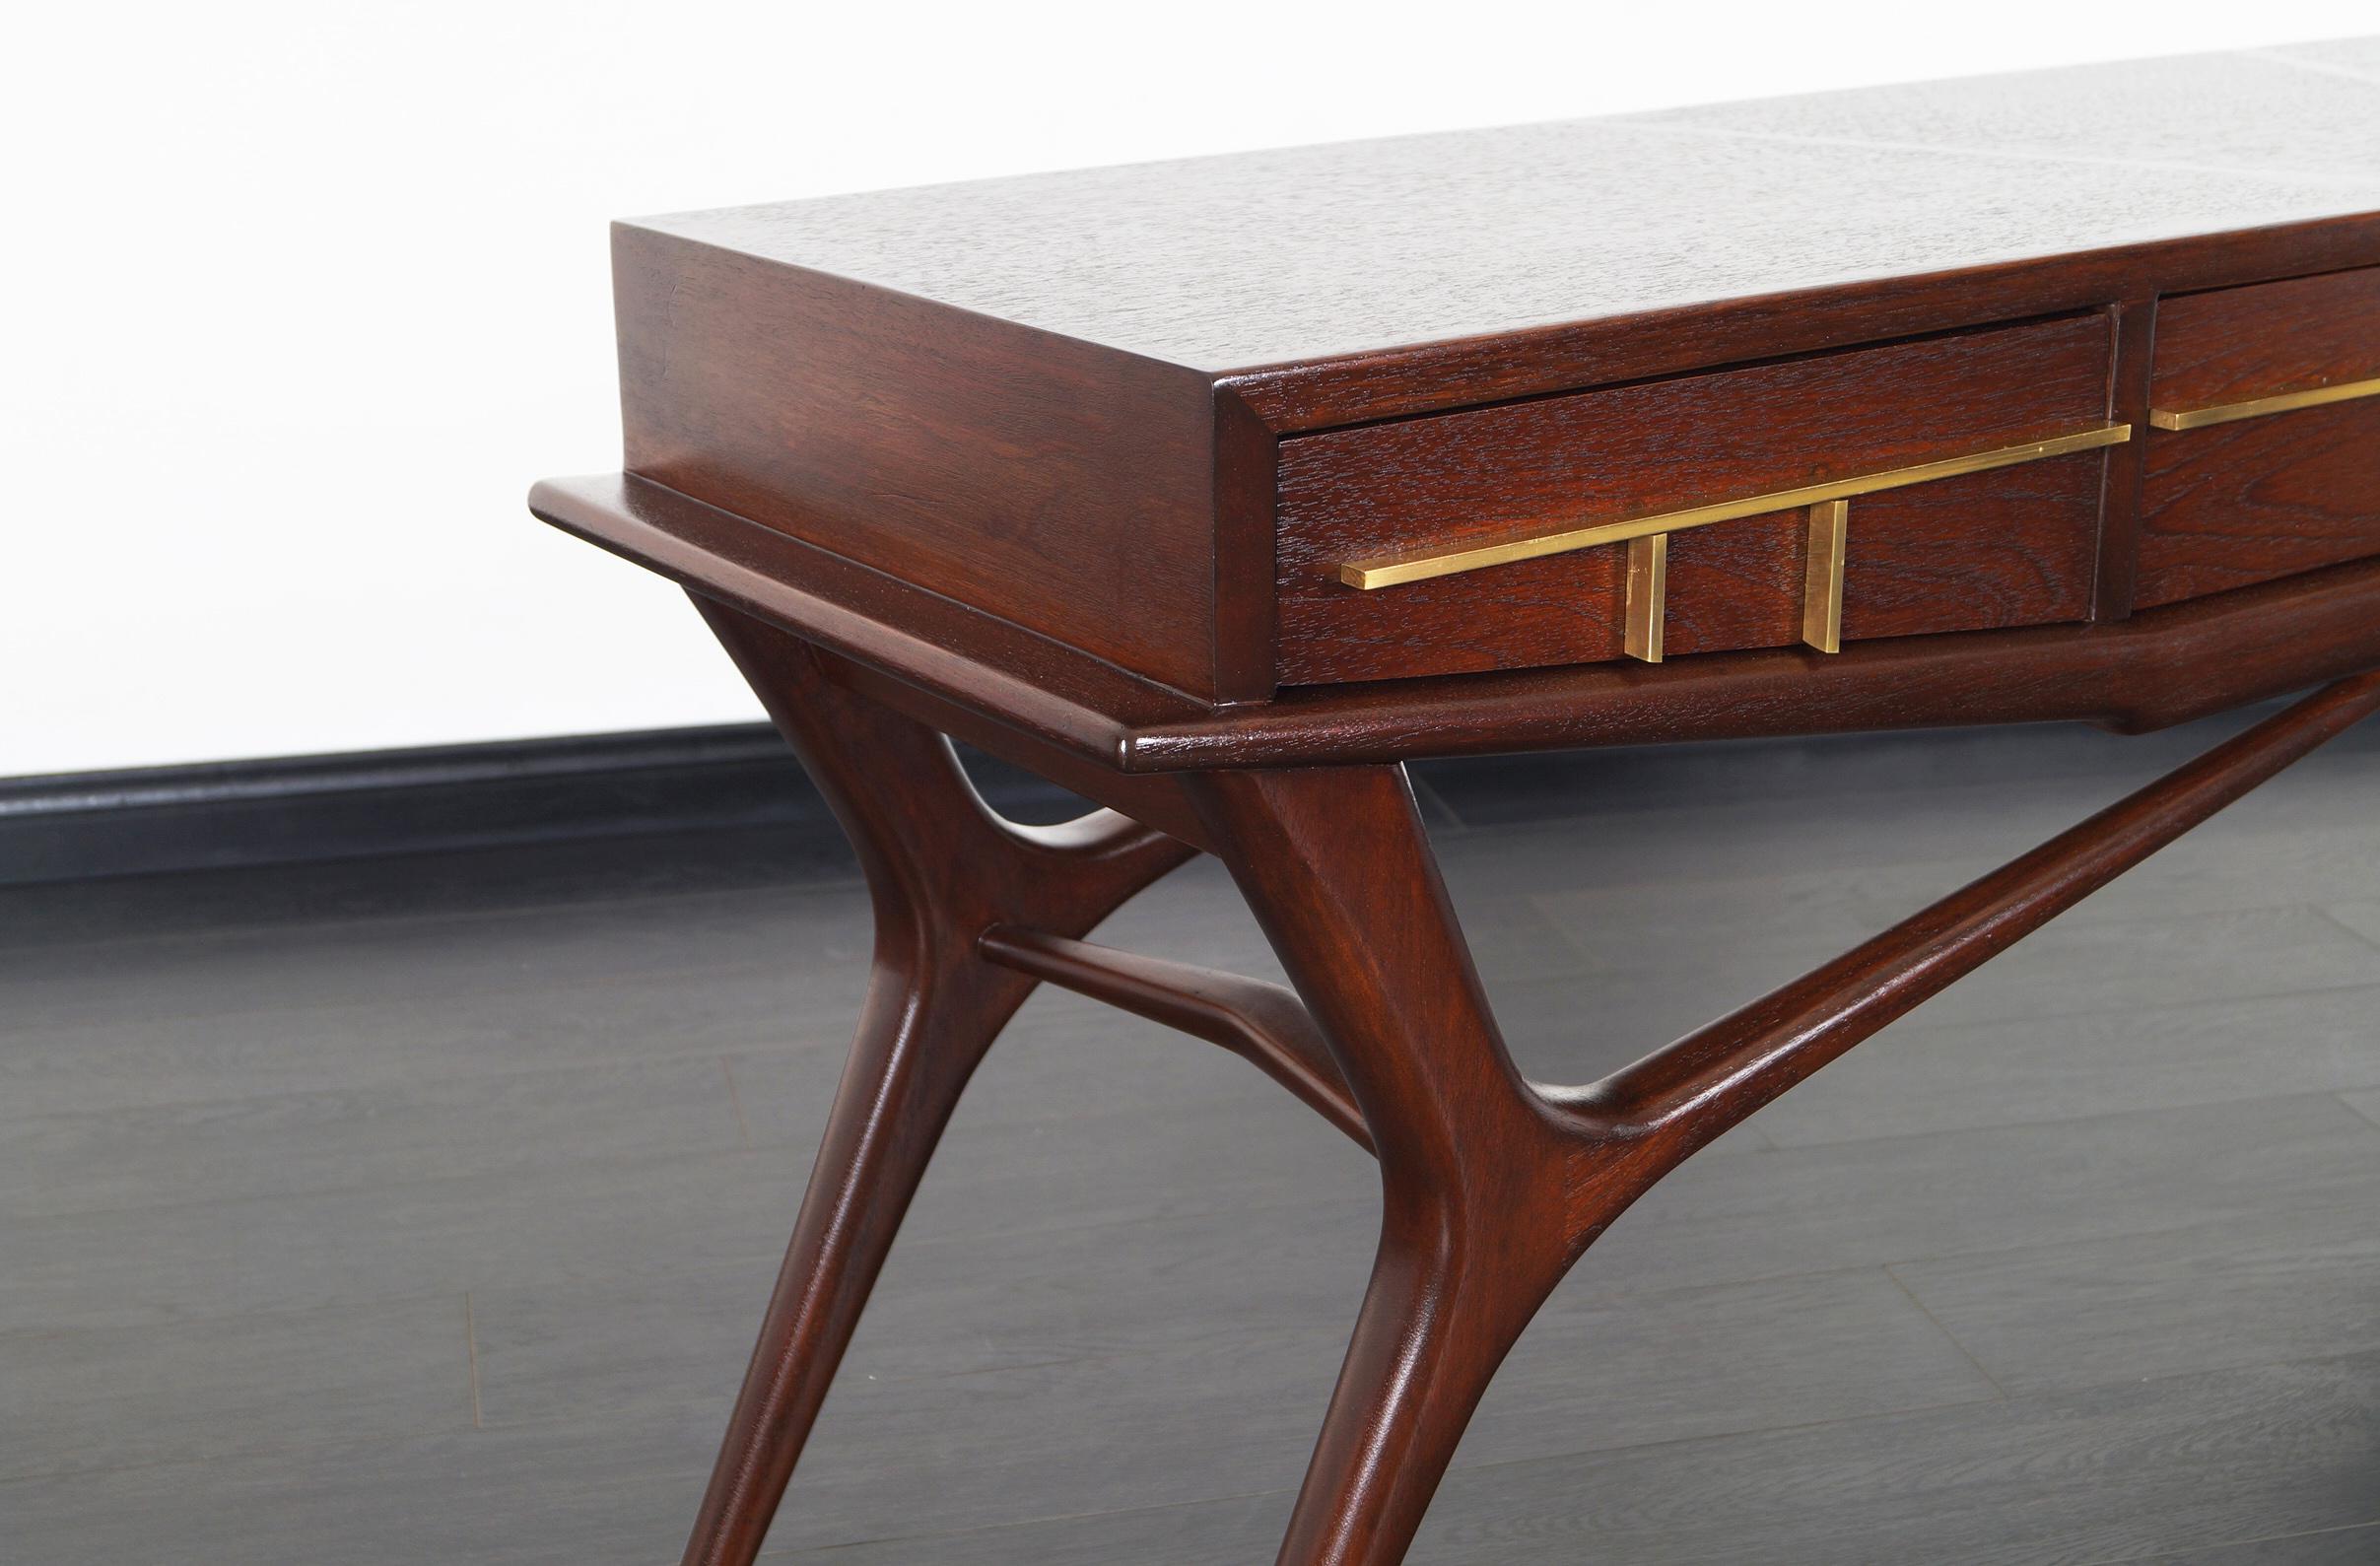 Mid-20th Century Mexican Modernist Console Table by Frank Kyle